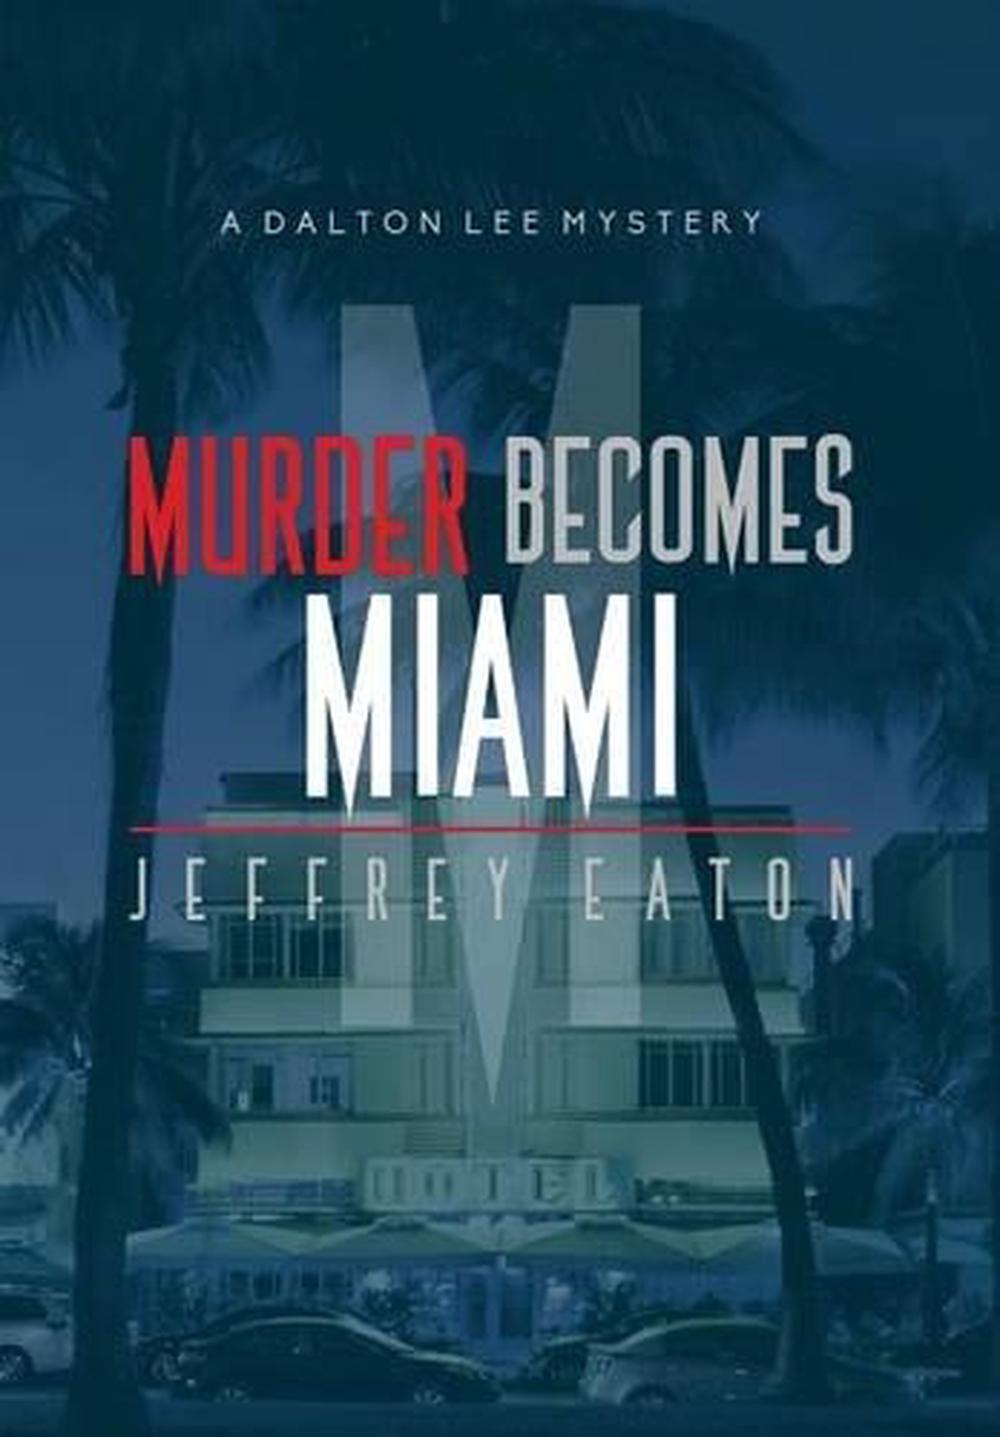 Murder Becomes Miami by Jeffrey Eaton